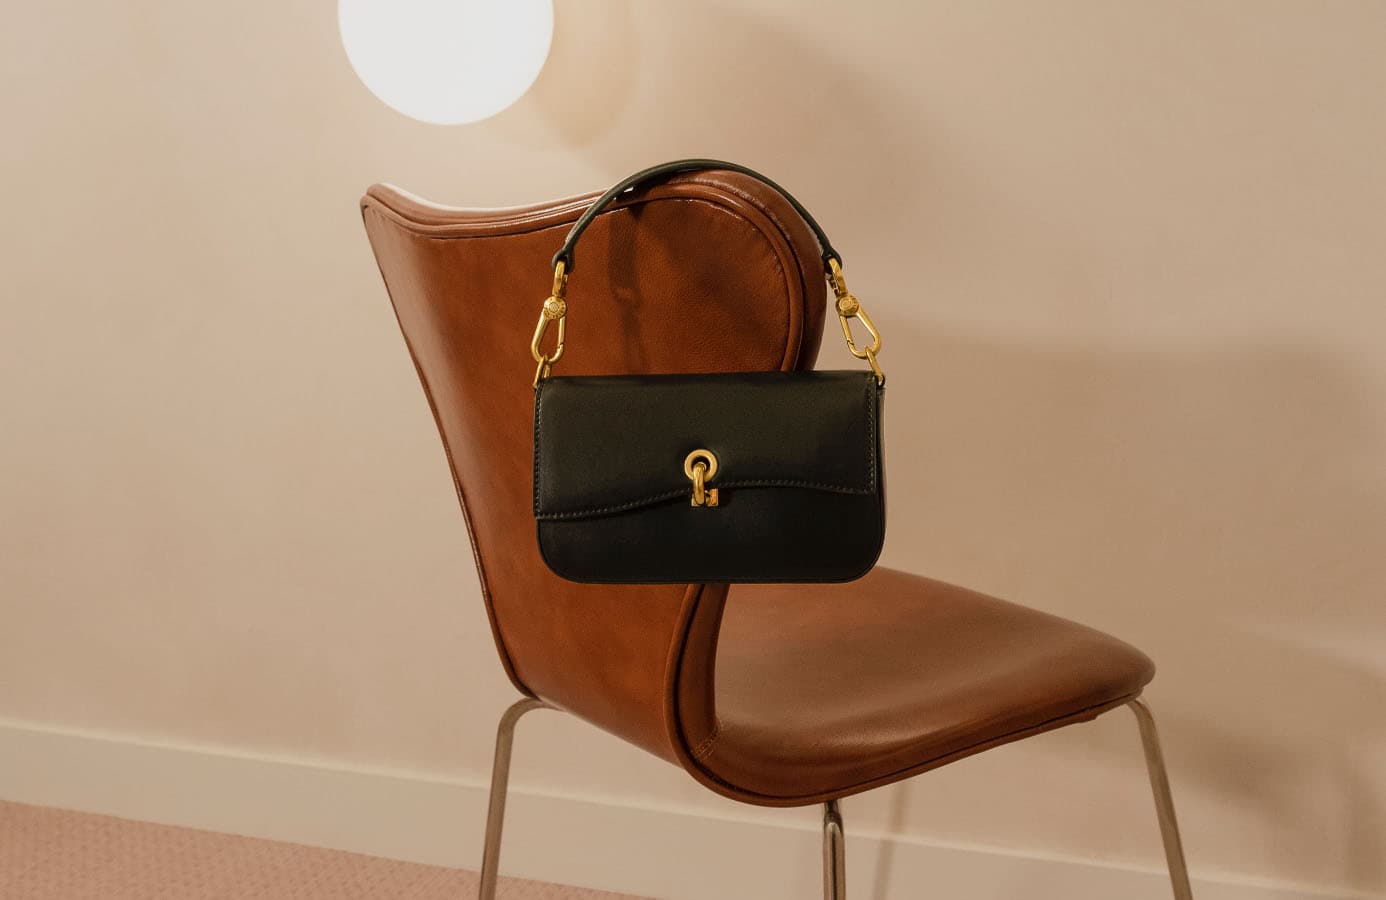 Explore Holiday: Gifts For Her - CHARLES & KEITH